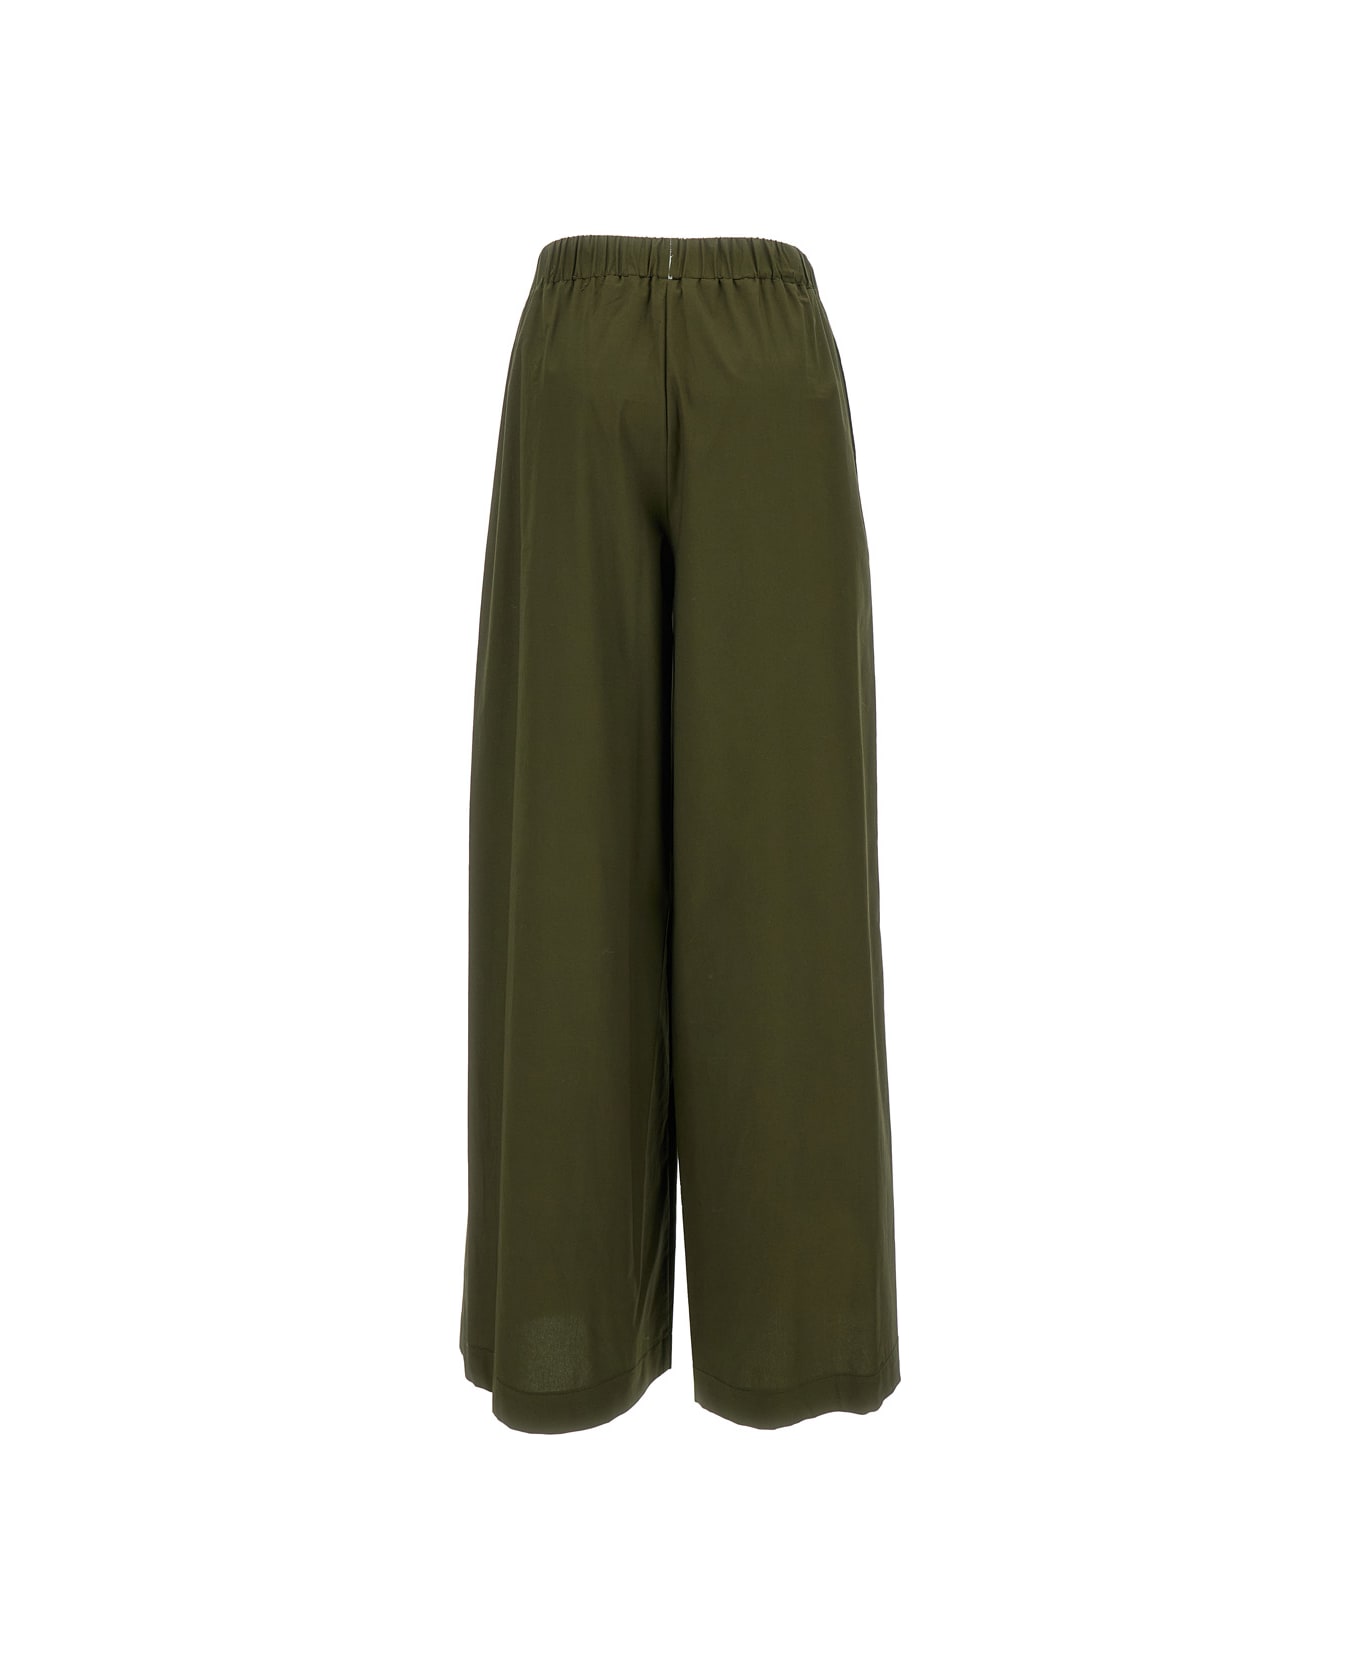 Federica Tosi Green Elastic High-waisted Pants In Stretch Cotton Woman - Green ボトムス